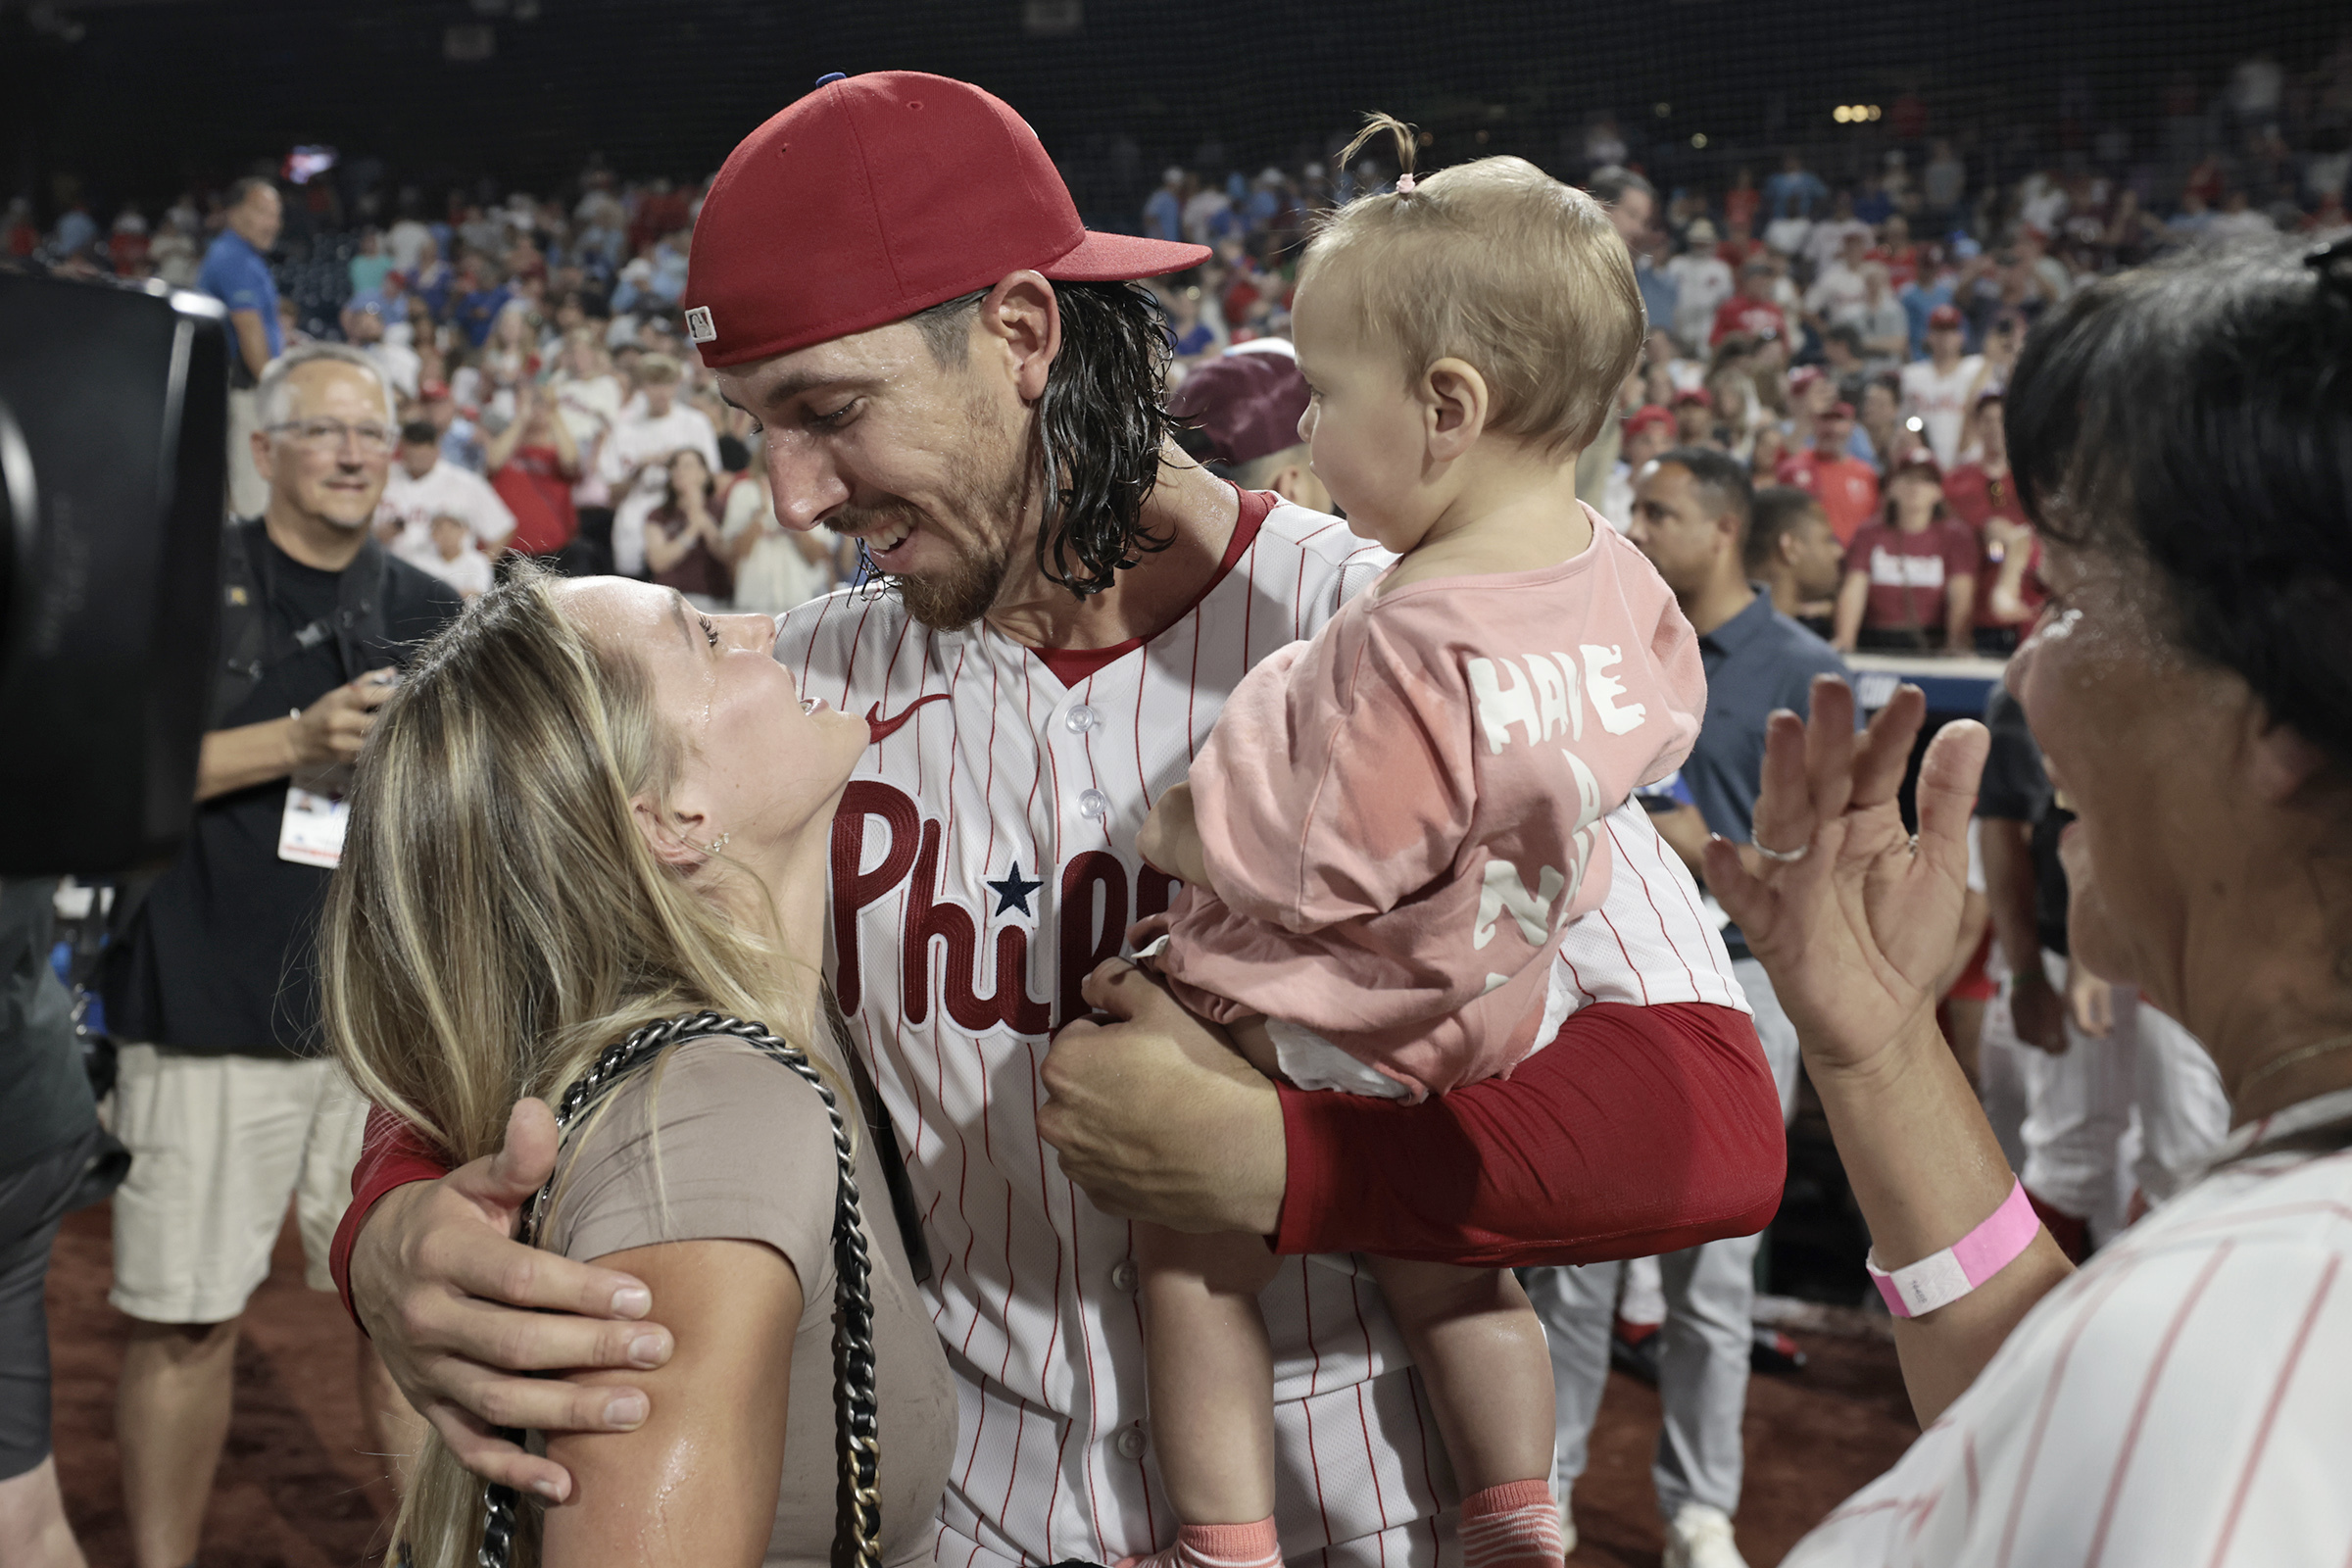 Weston Wilson's parents reflect on his Phillies debut: It was